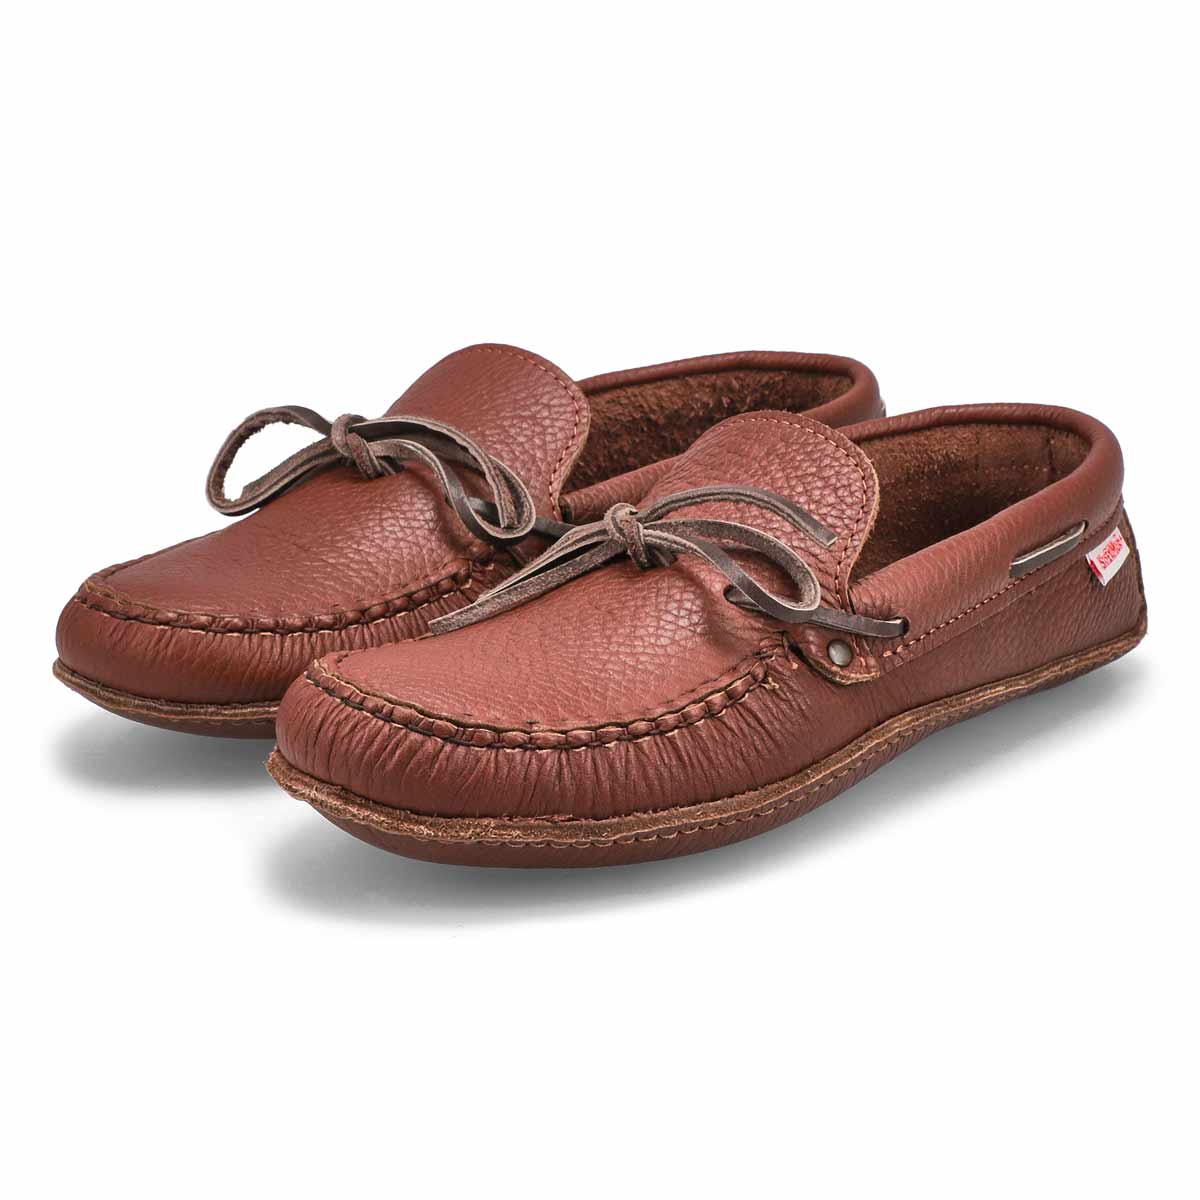 Men's 9018 Double Sole Handsewn Oil SoftMocs - Brown